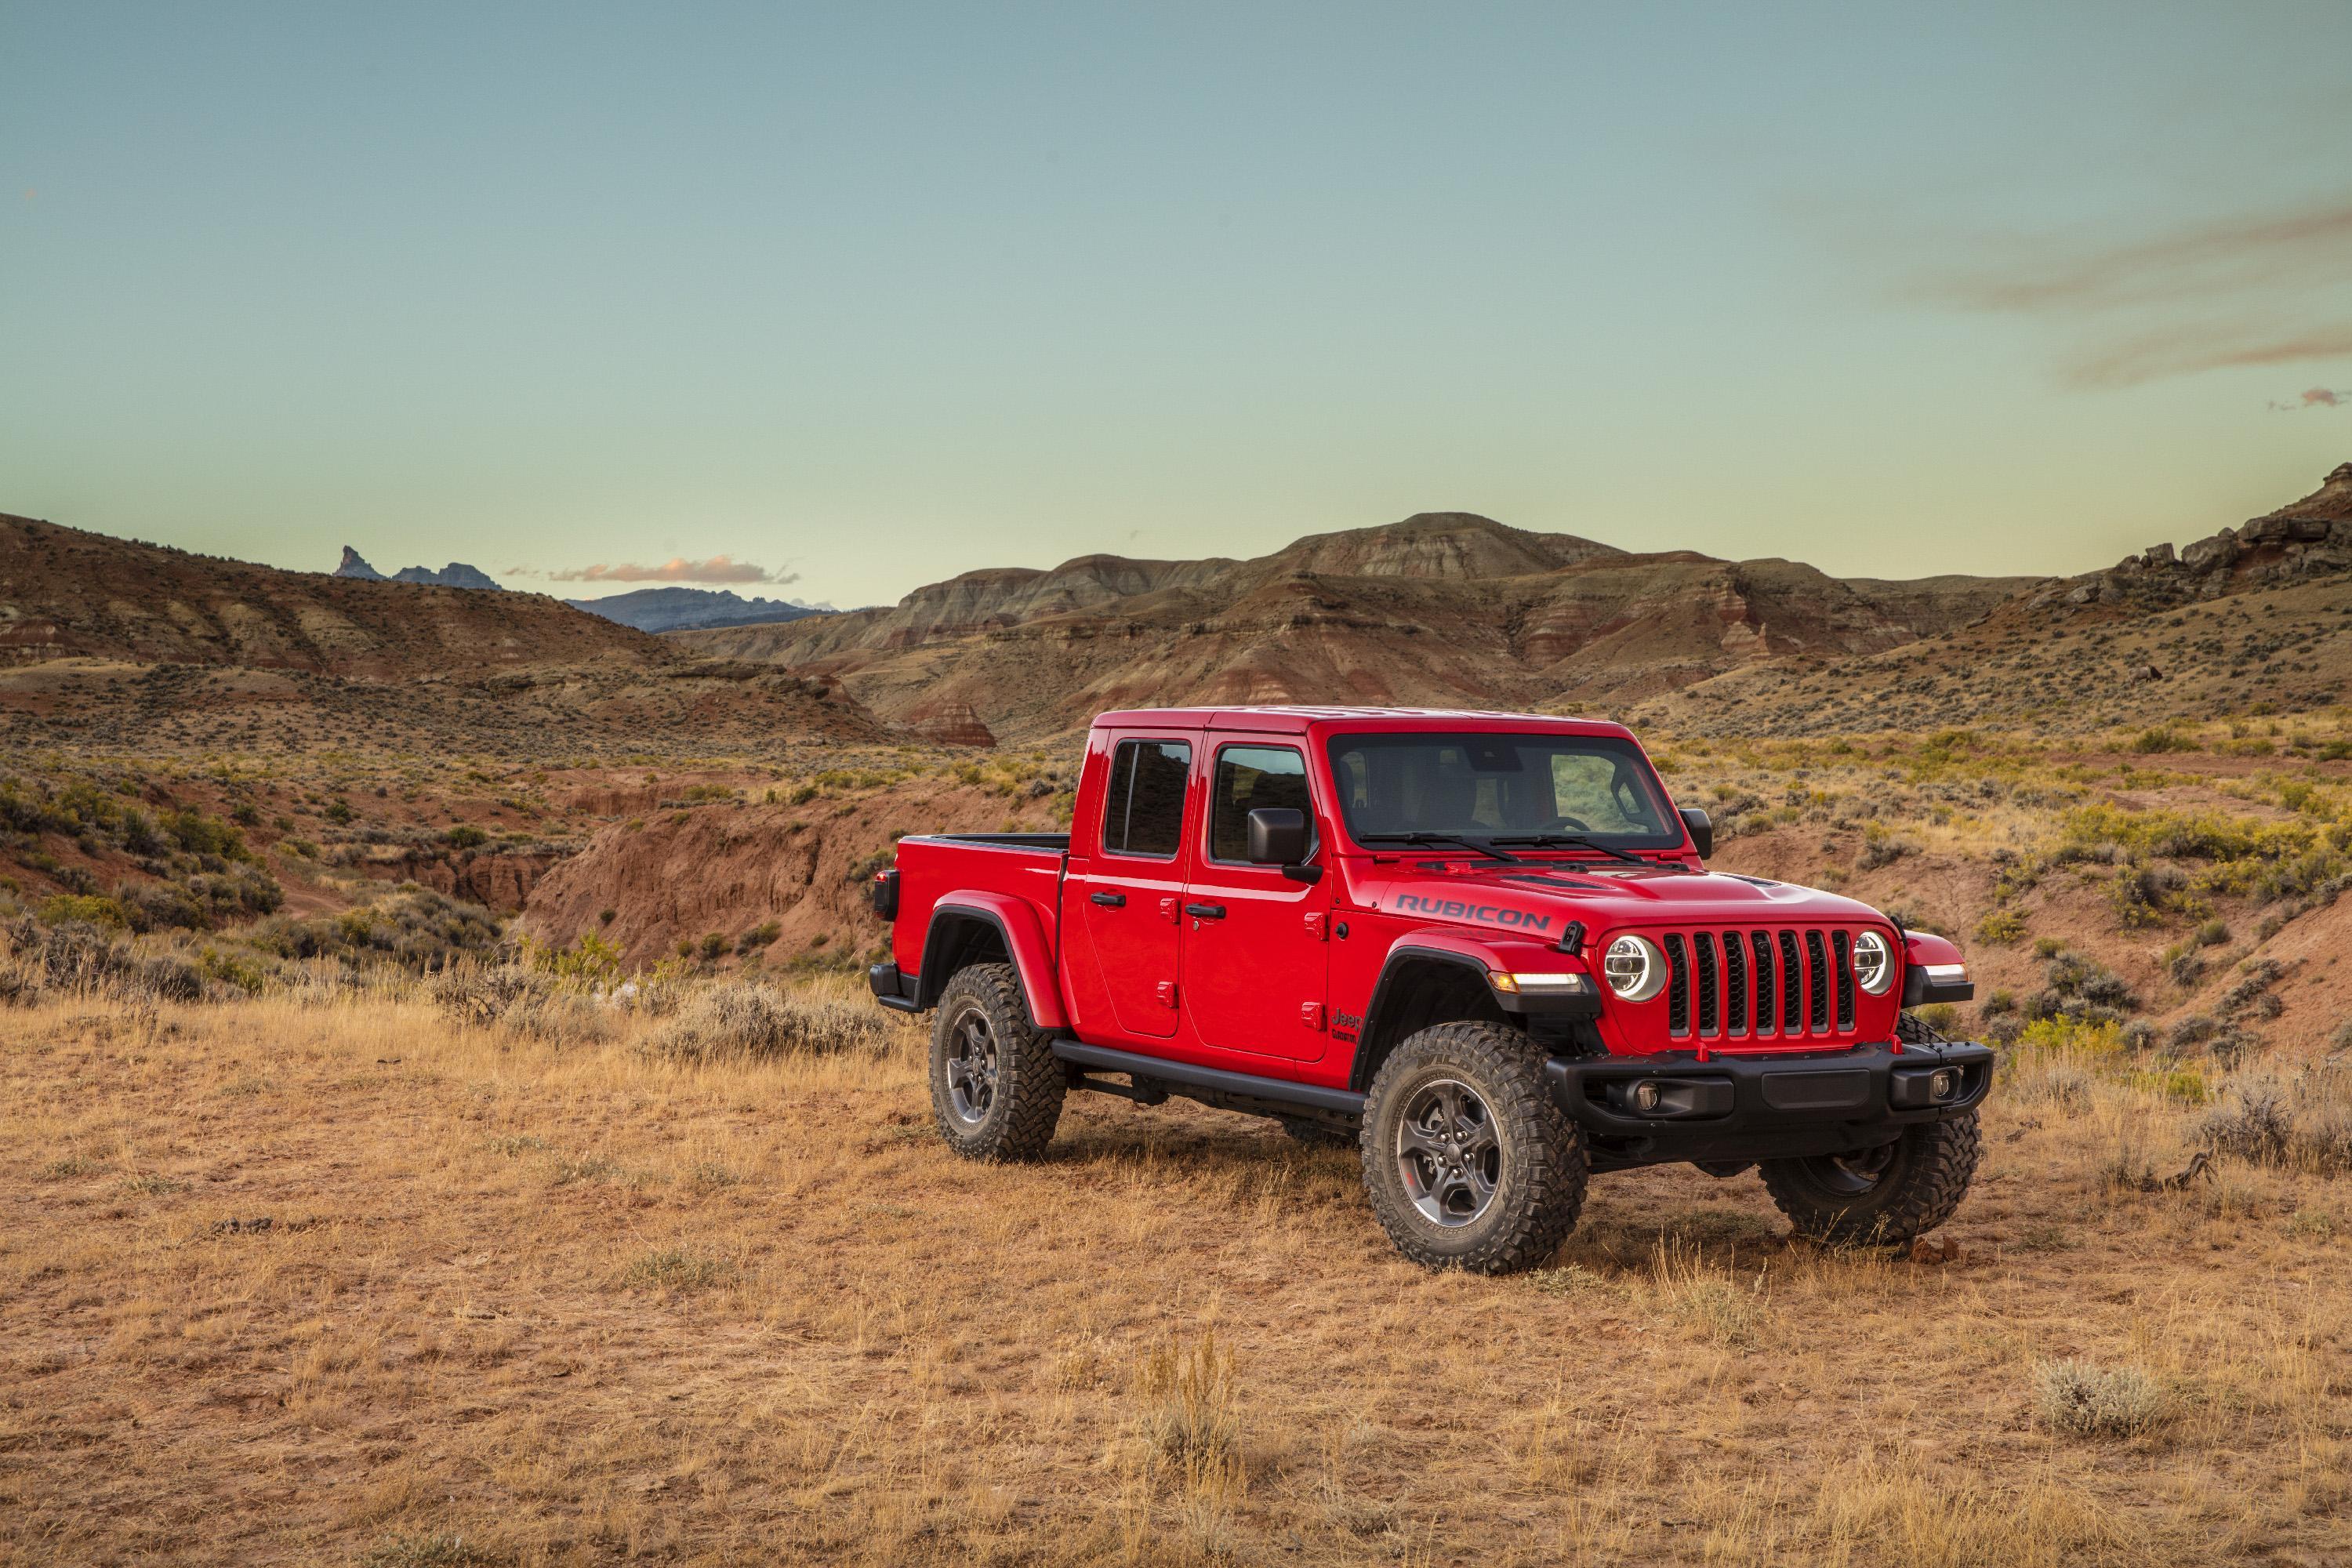 Wallpaper Of The Day: 2020 Jeep Gladiator